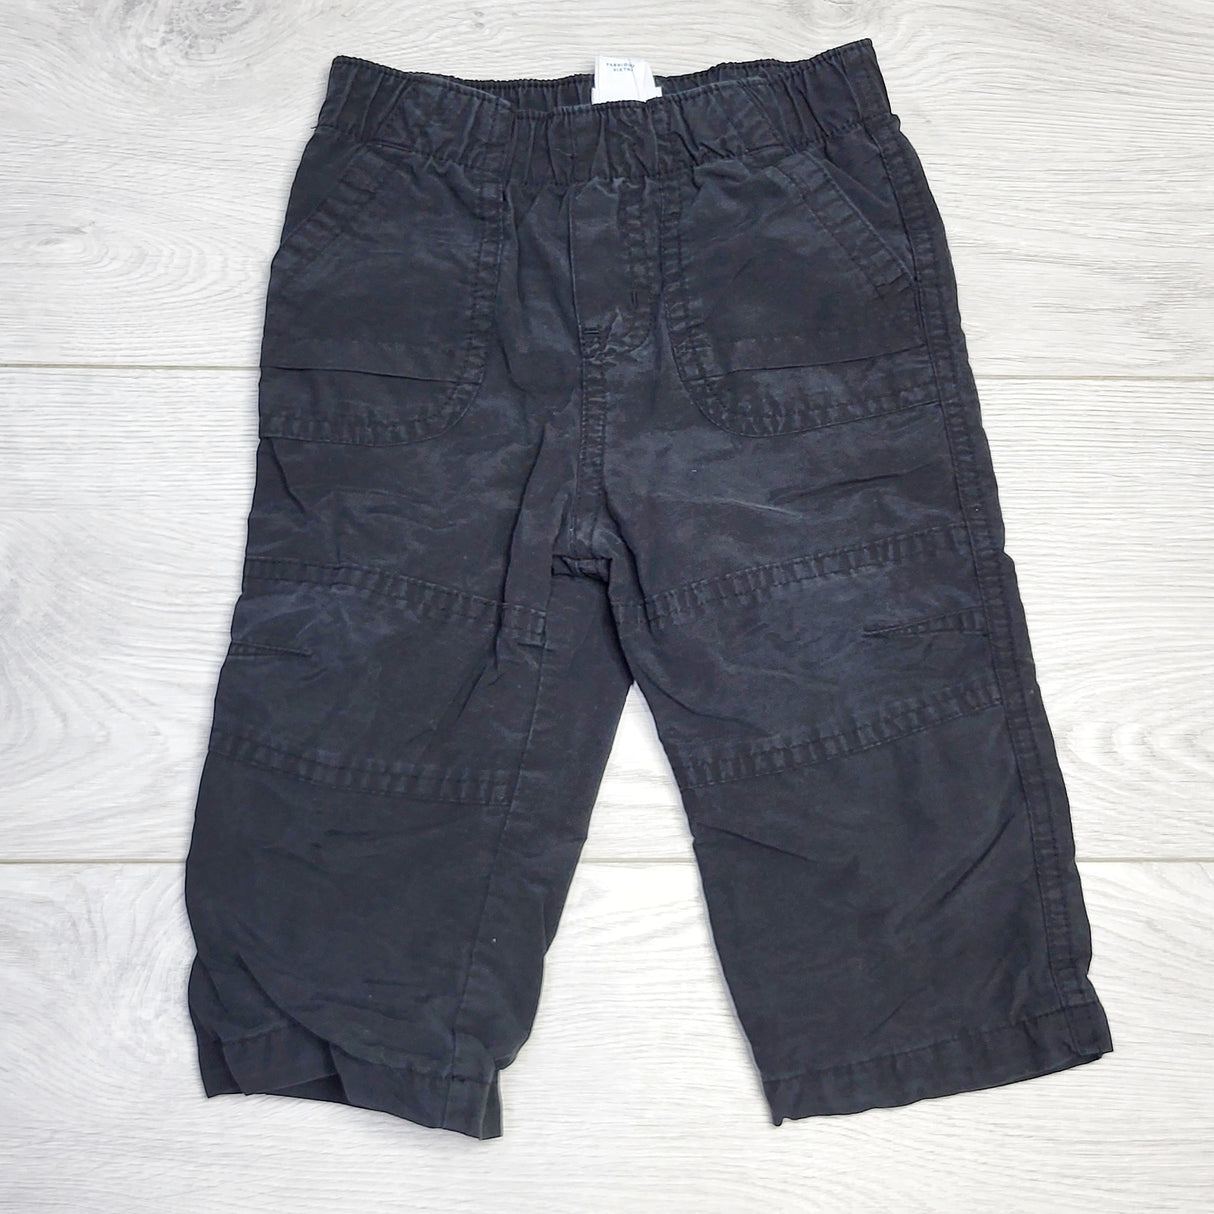 RZA2 - Circo black jersey lined pants. Size 12 months